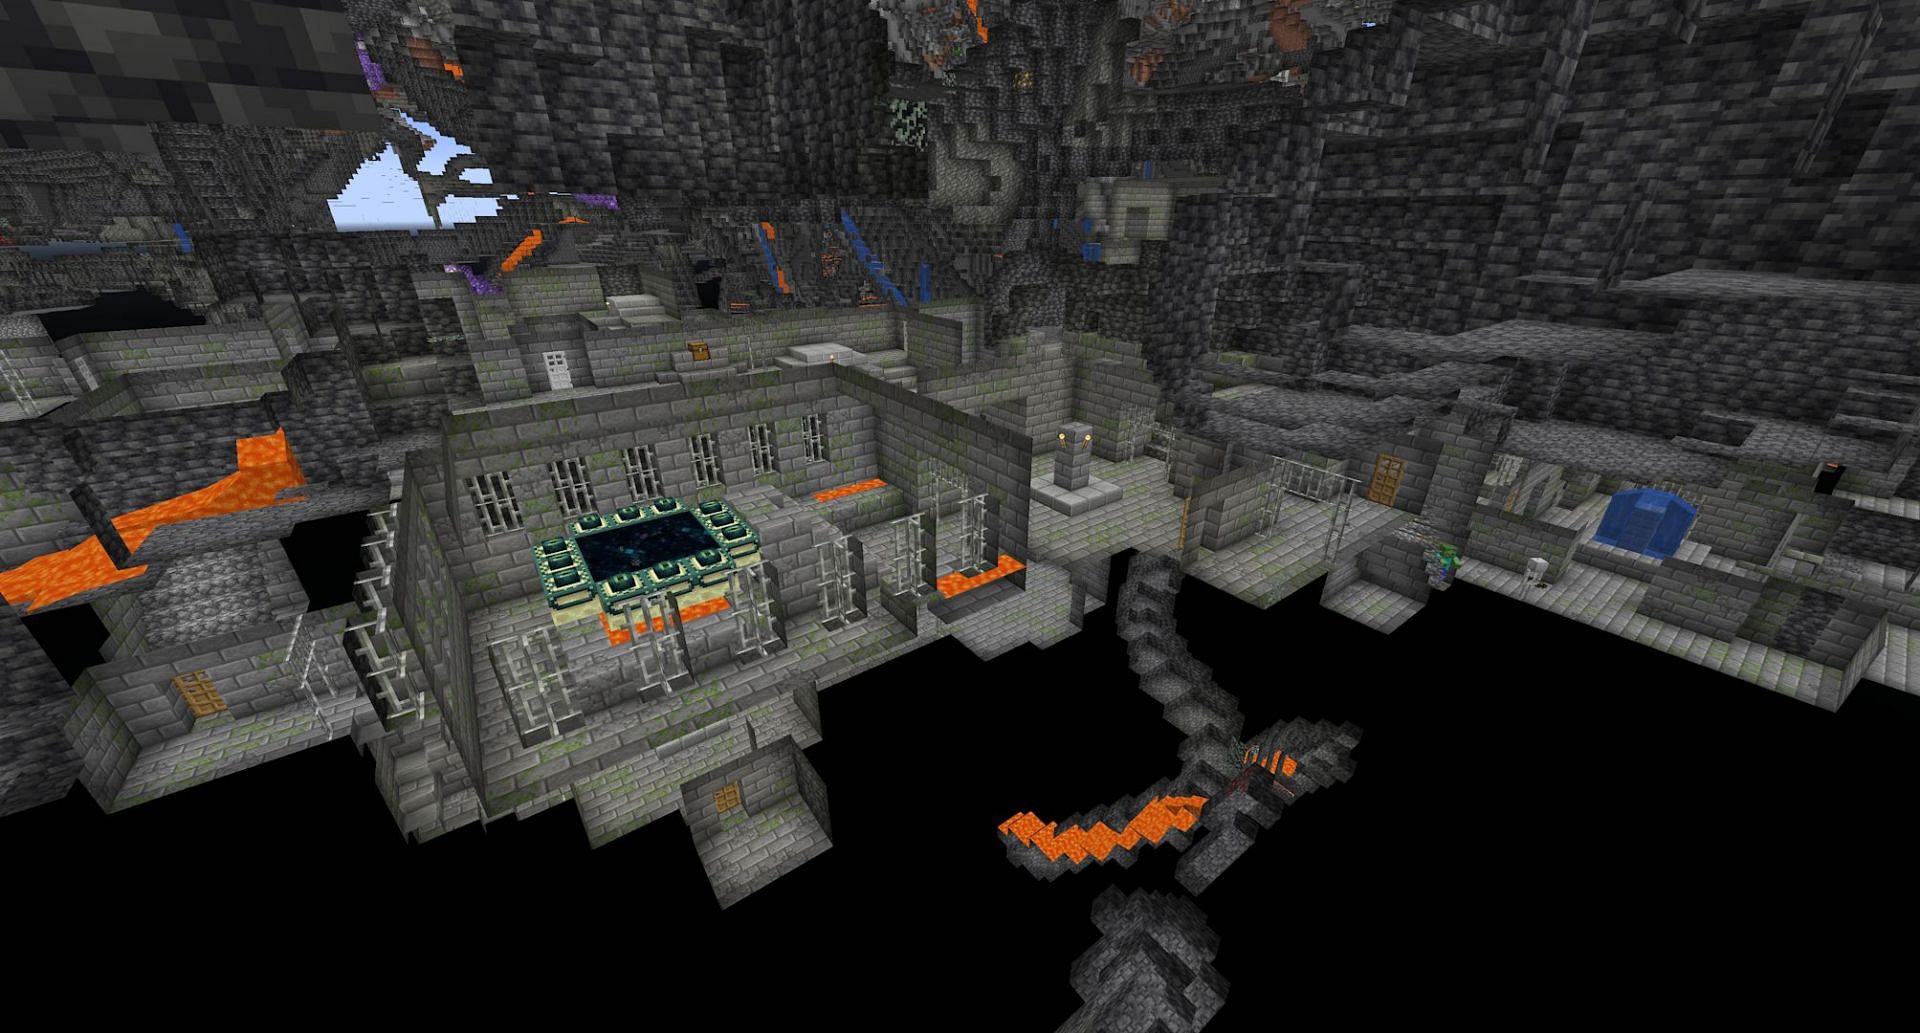 Hunting for the portal room in strongholds can be deadly (Image via Mojang)